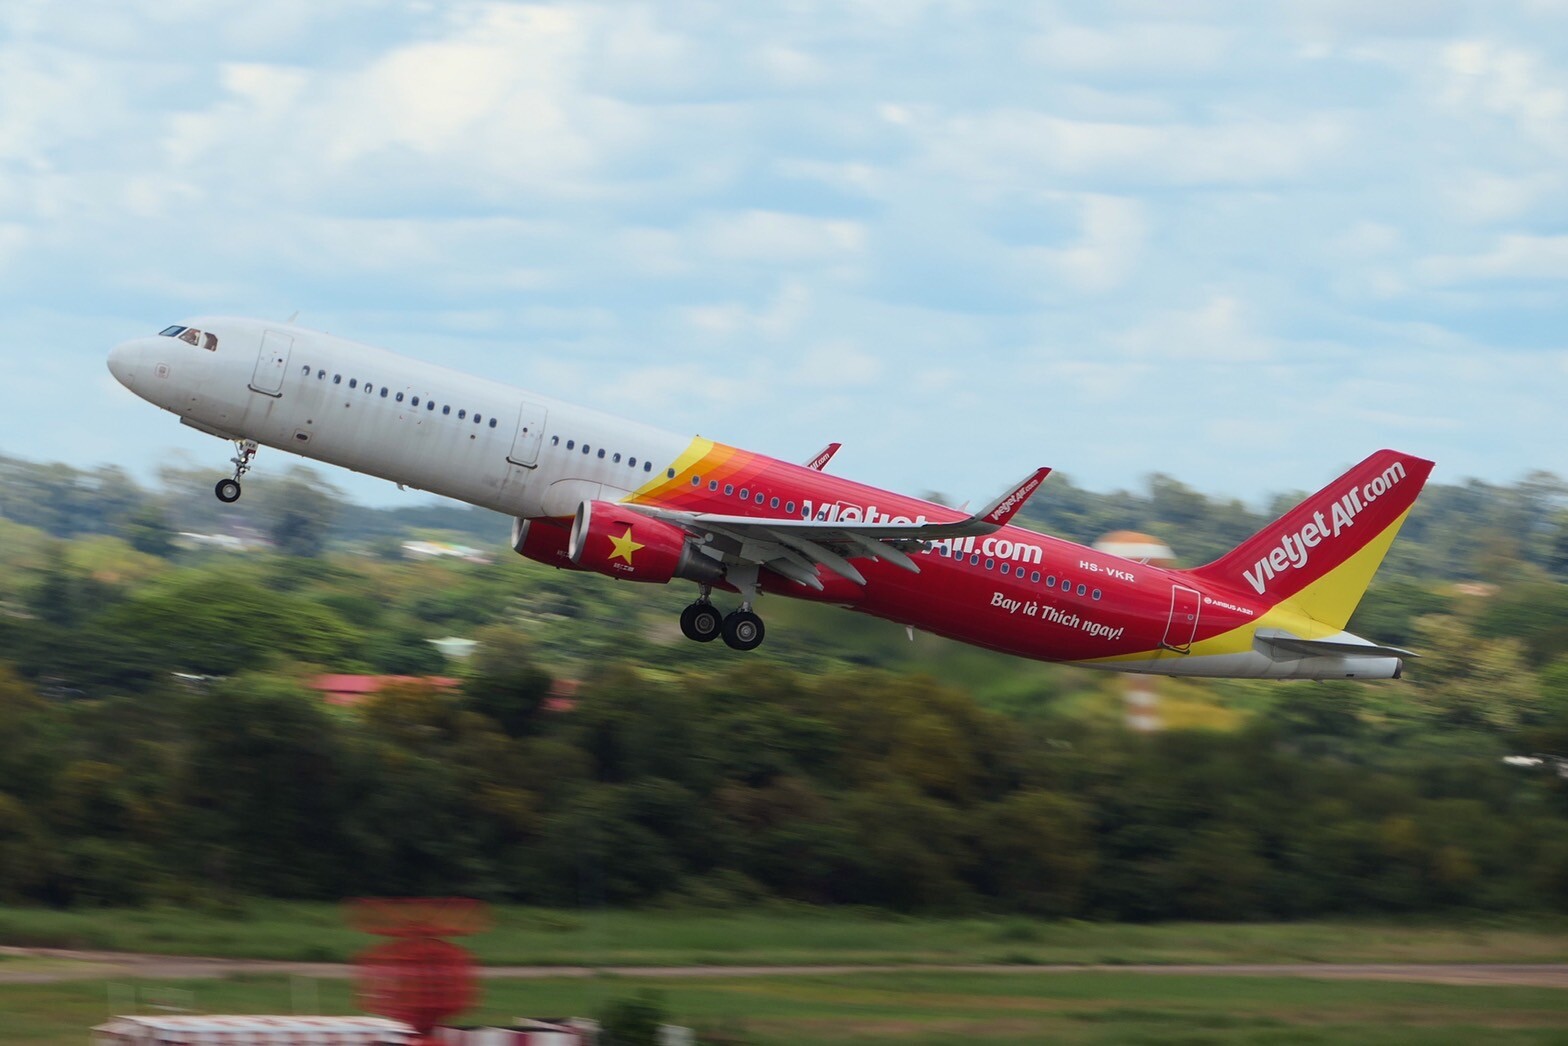 OK NUMBER 1! Thai Vietjet offers 10% Discount Codes plus 1,000 Funcoins for new Members